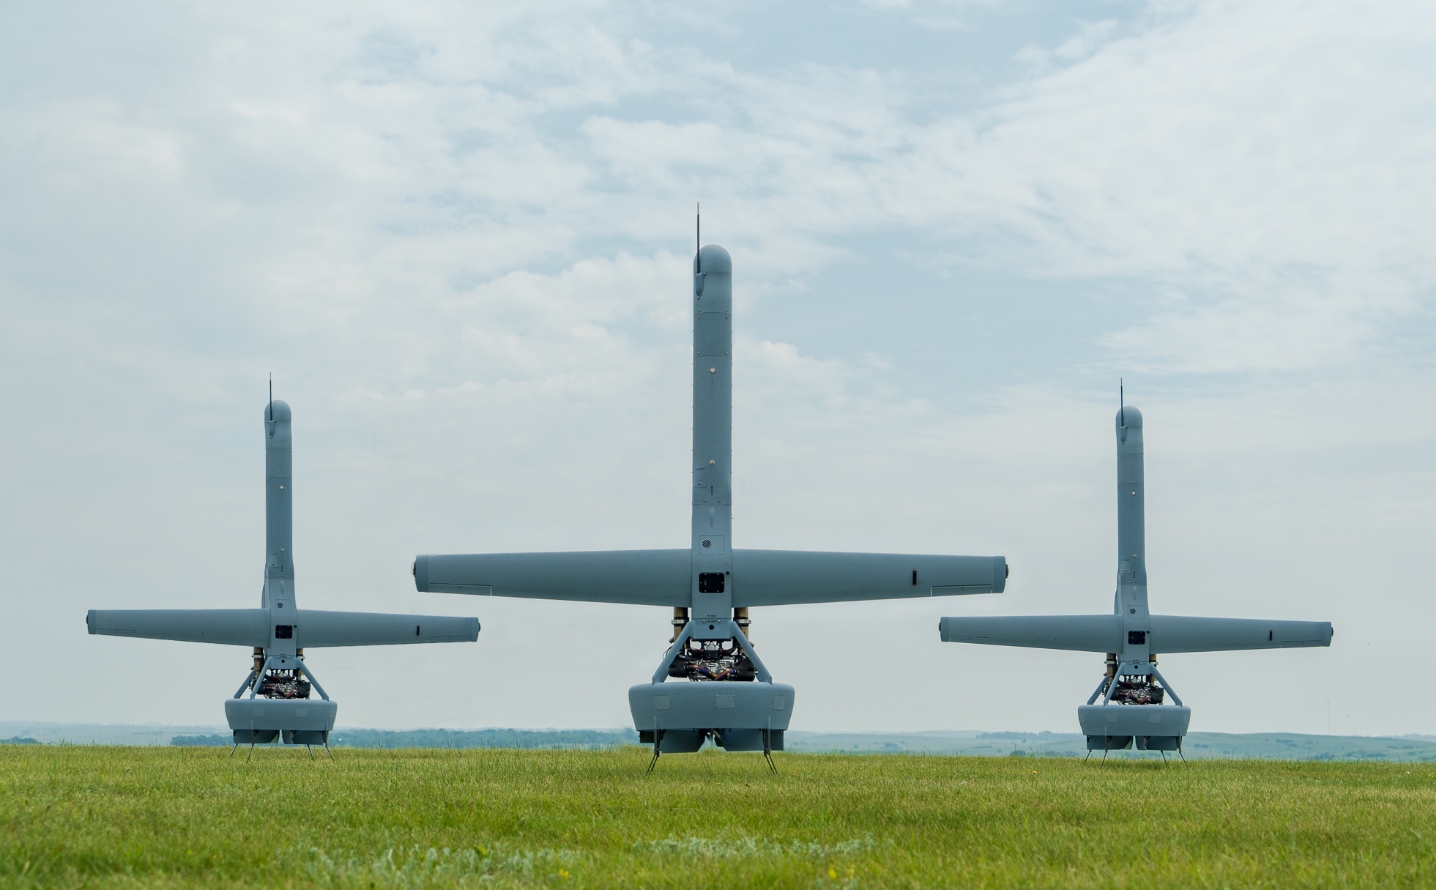 Autonomous mission executed by three V-BAT Team was the final milestone of an AFWERX autonomy effort under their Strategic Funding Increase (STRATFI) program and collaboration with the AFRL Sensors Directorate.